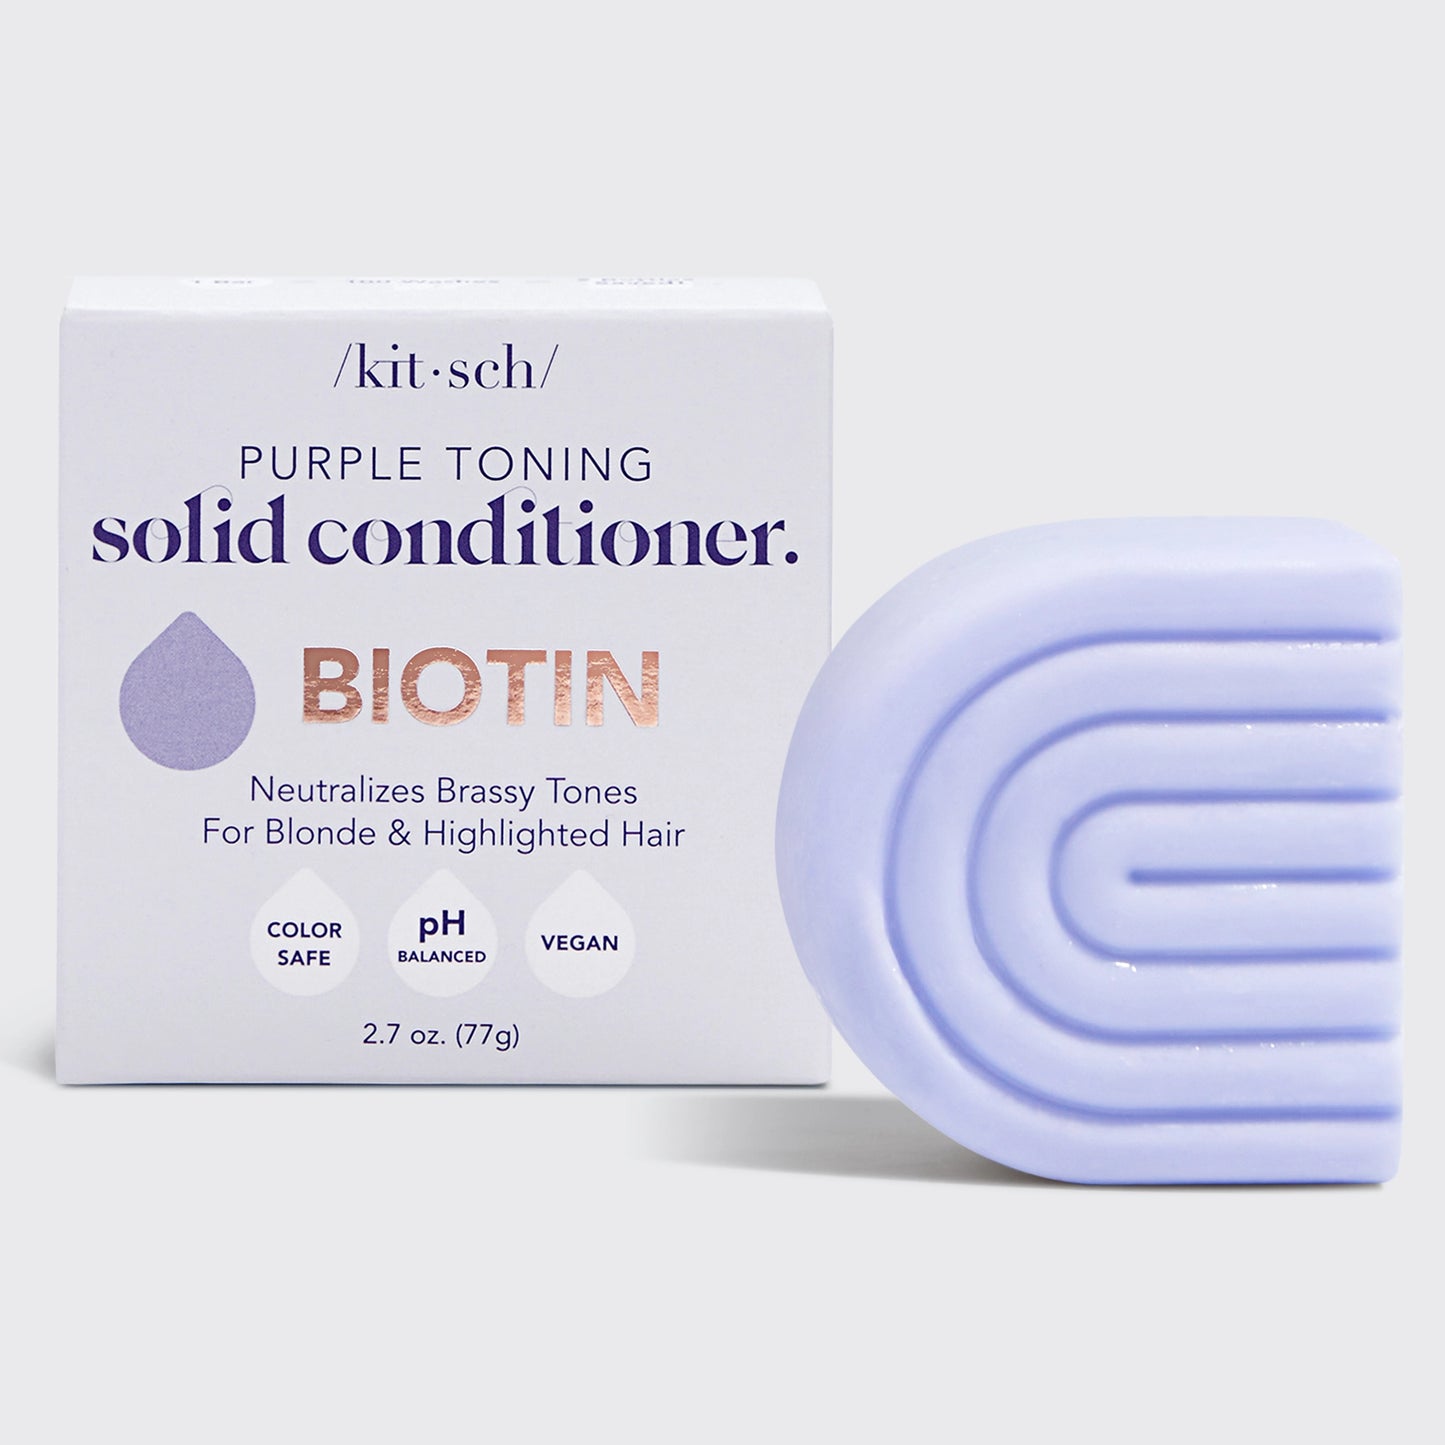 Kitsch Purple Toning Solid Conditioner Bar For Blonde & Highlighted Hair